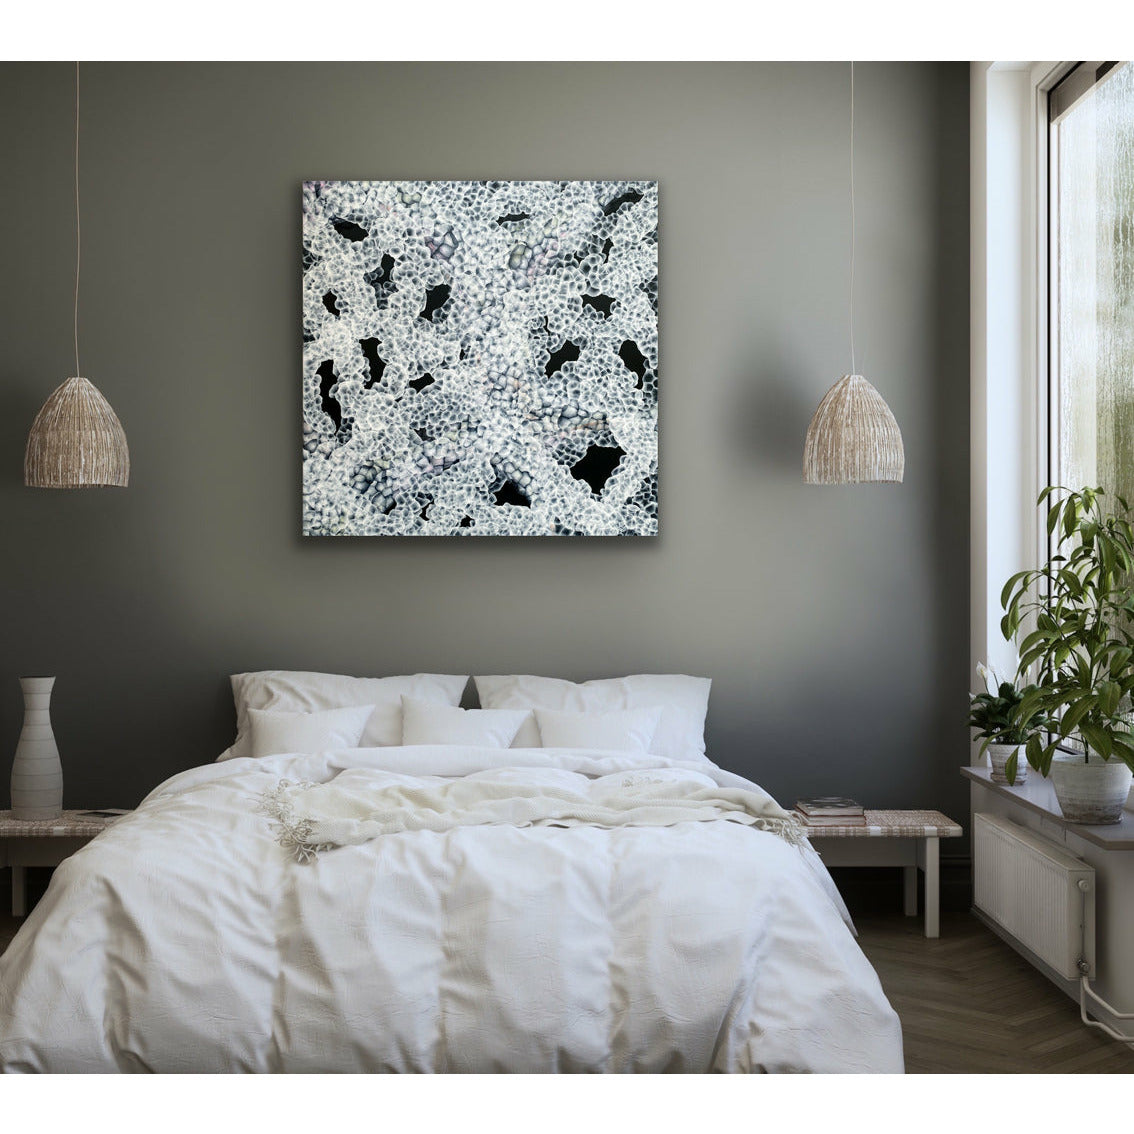 Aqueous Bloom Rock Pool Musings V - Large Abstract Sealife Painting